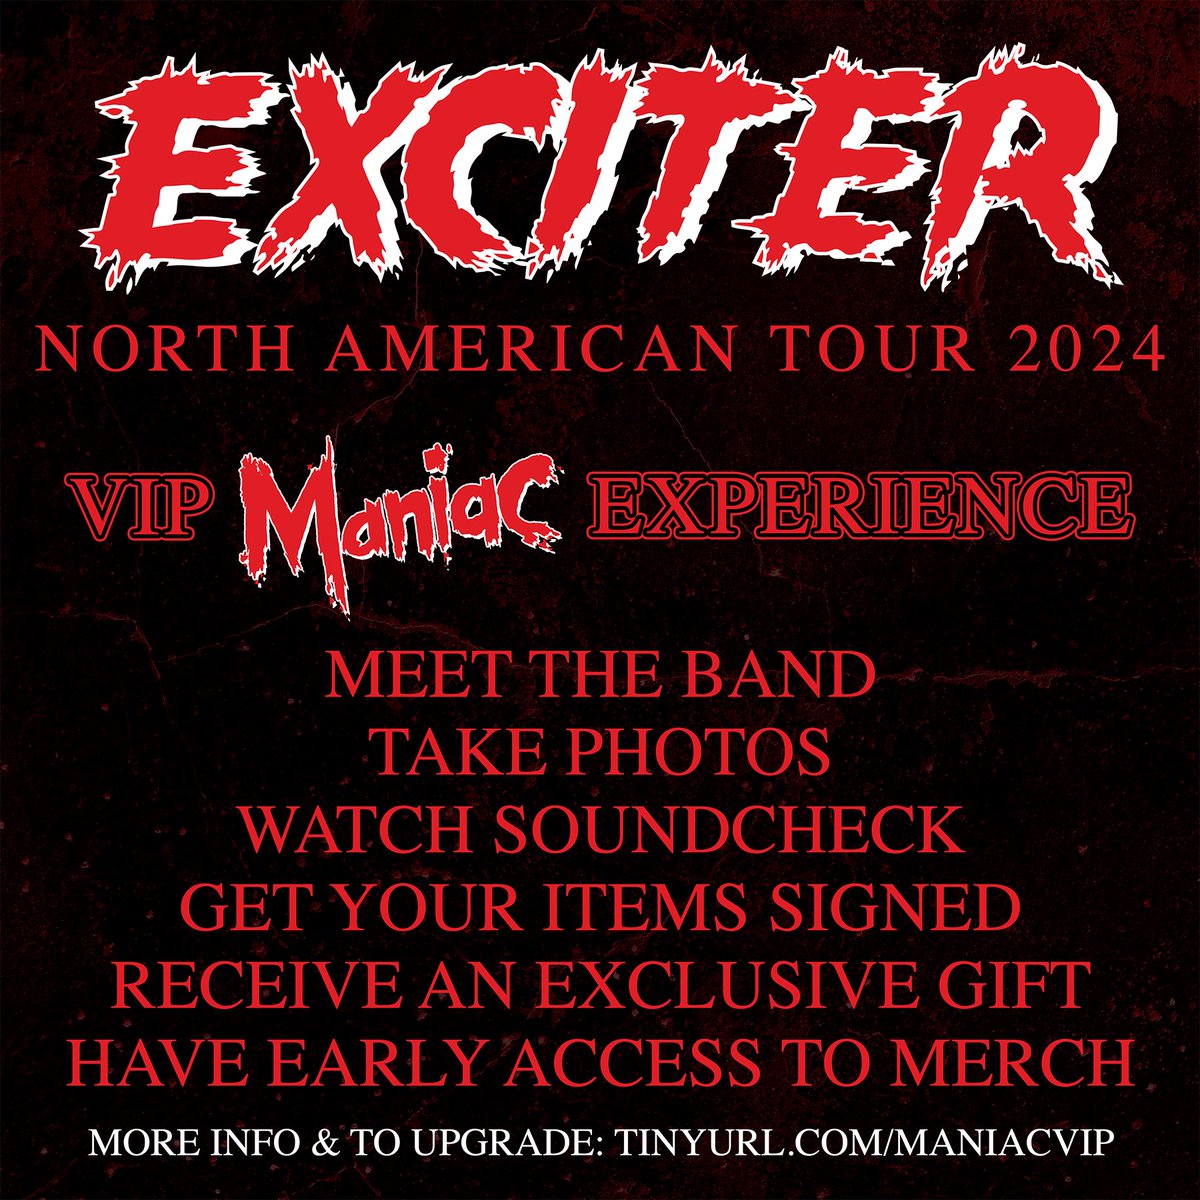 VIP MANIAC EXPERIENCE upgrades for our North American summer tour available now. Watch soundcheck, meet the band for photos/autographs, receive an exclusive gift, & have first access to merch. EXTREMELY LIMITED & available here: tinyurl.com/MANIACVIP